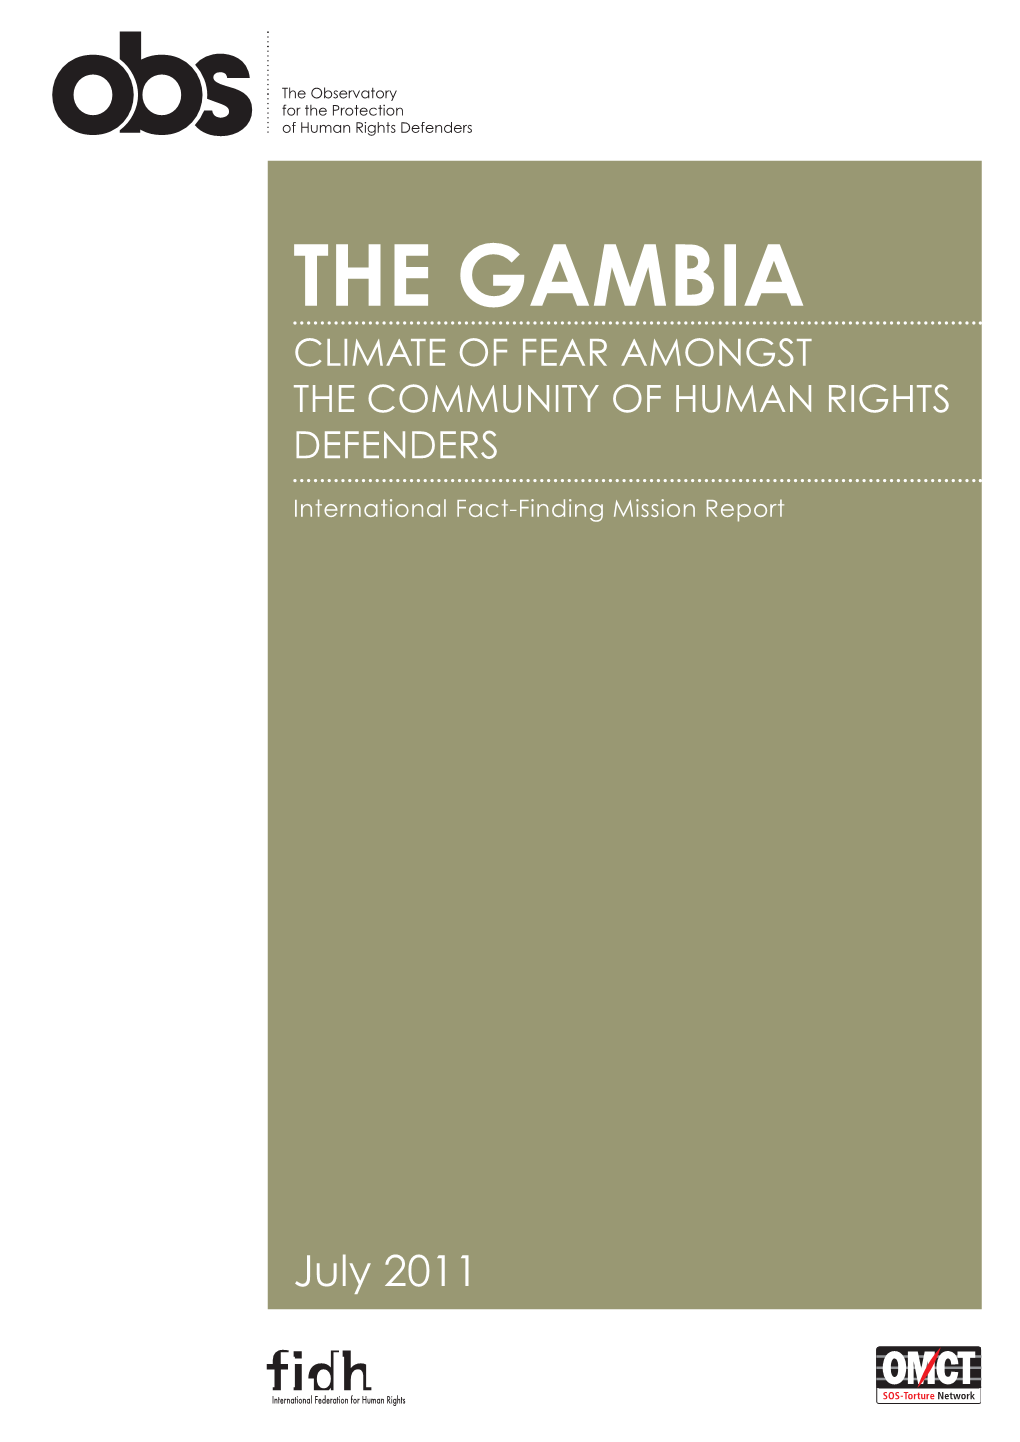 The Gambia Climate of Fear Amongst the Community of Human Rights Defenders